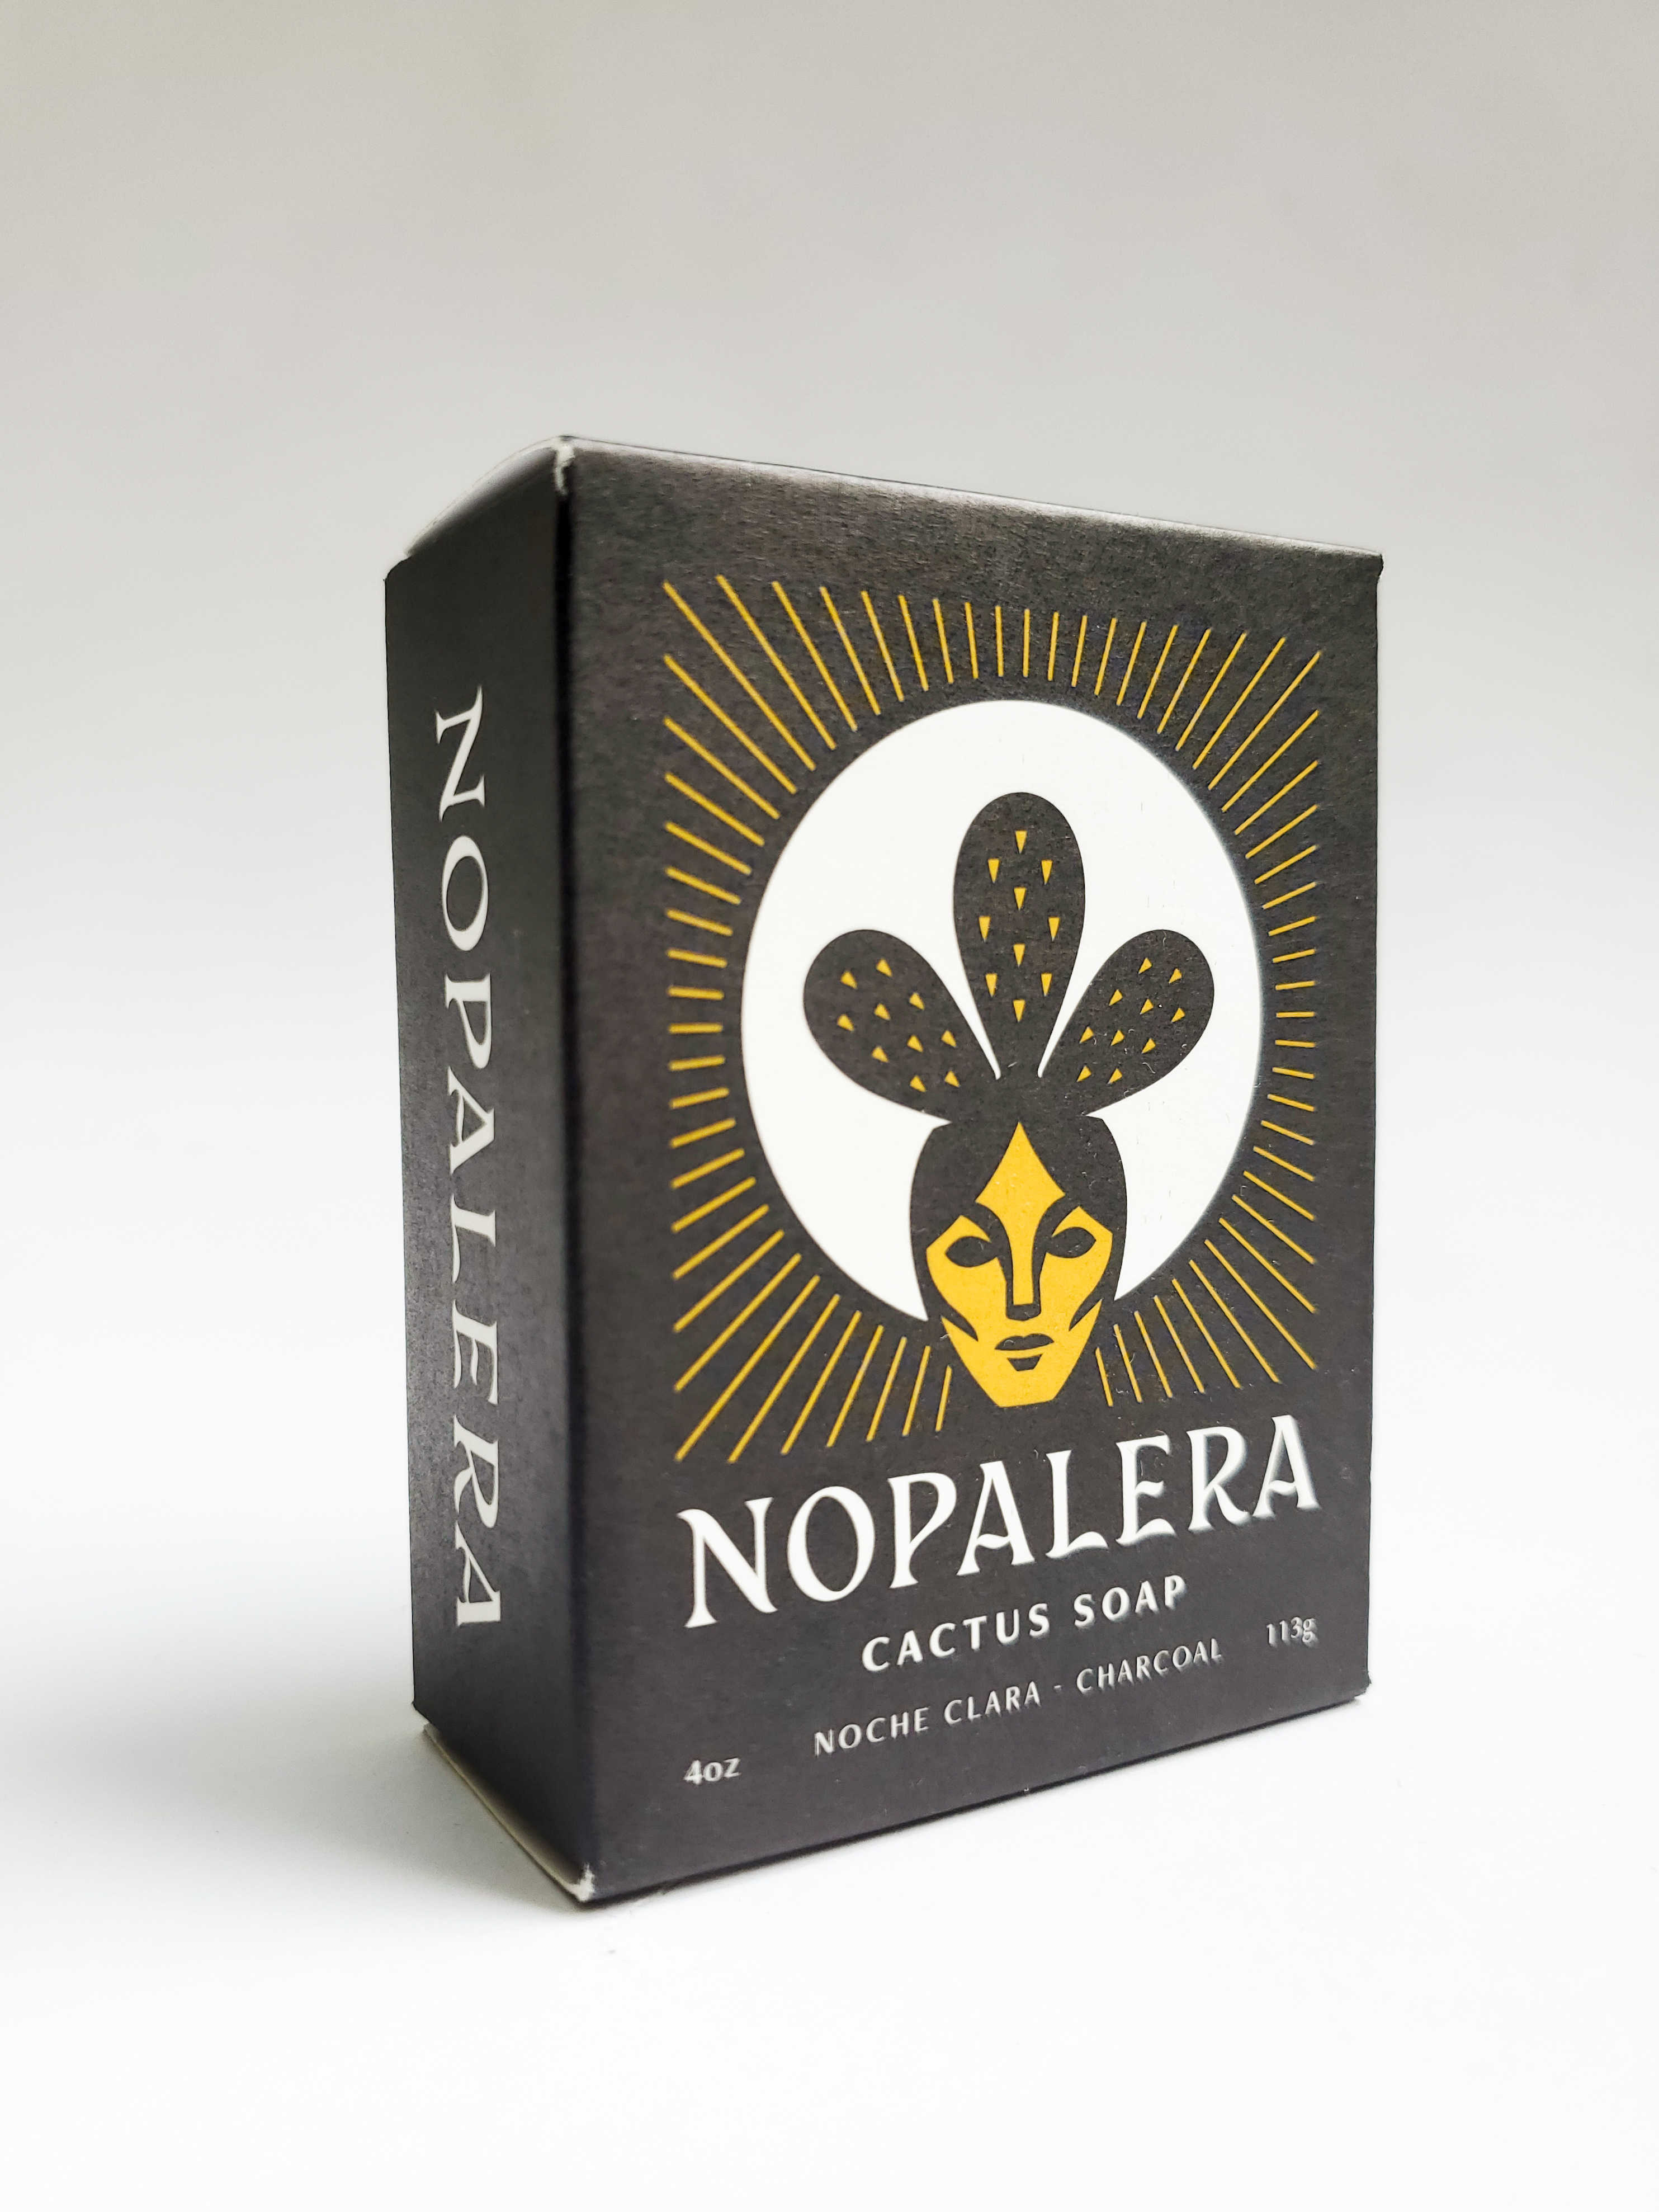 A black box with an image of a woman with a cactus plant on top of her head, standing in front of the sun. Text on the box says "Nopalera Cactus Soap. 4 oz. Noche Clara. Charcoal. 11%."